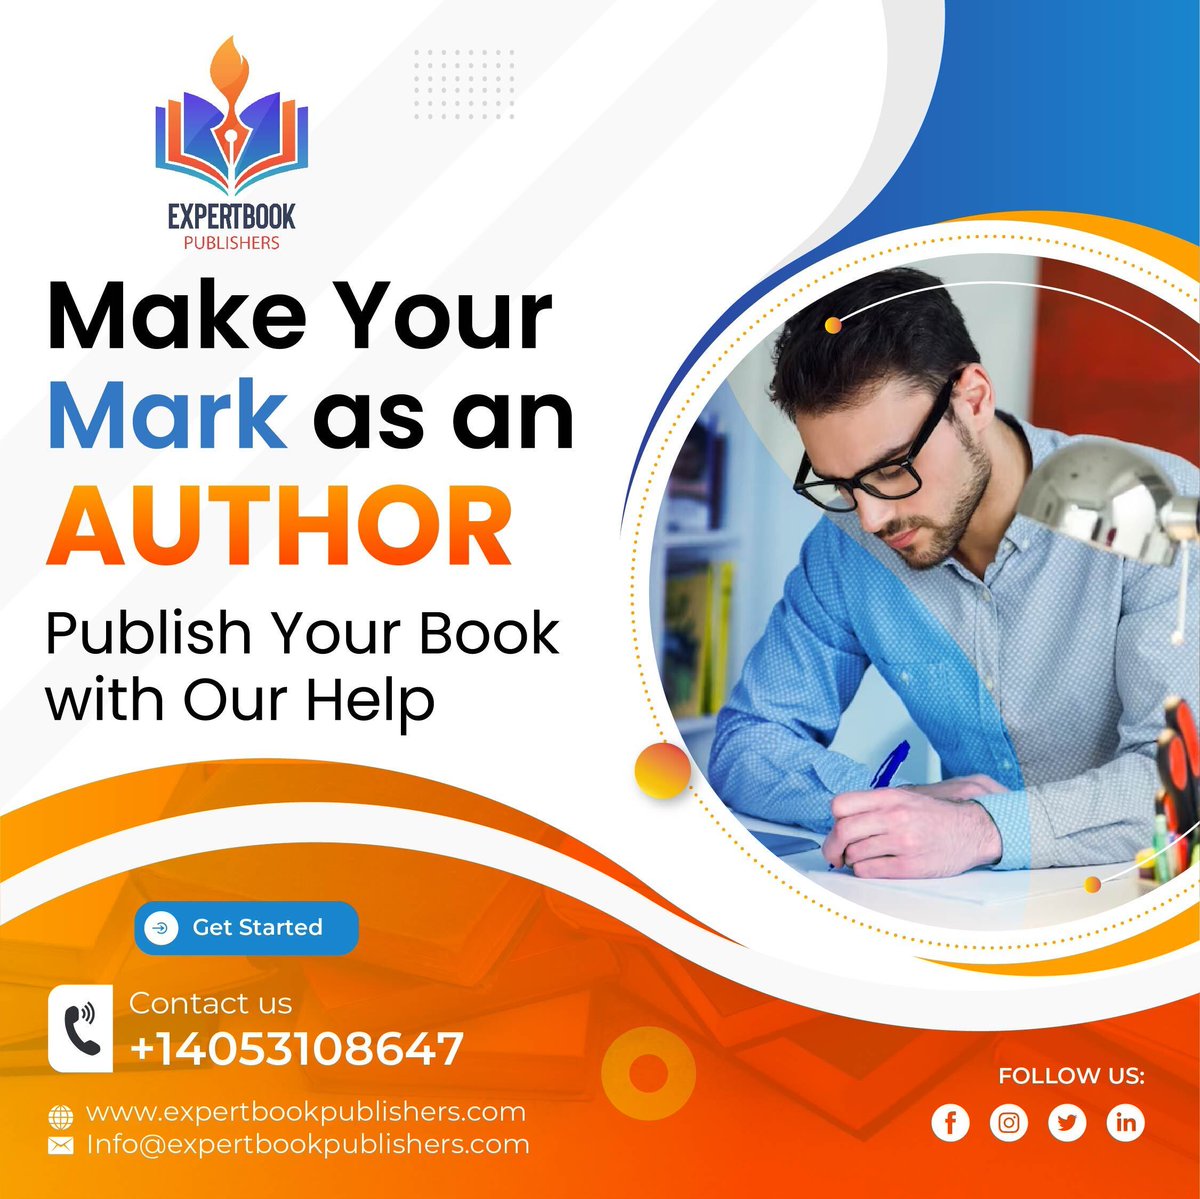 Make your mark as an author and publish your book with our help. We're excited to see your story come to life.
#indieauthor #bookbuzz #bookbuzzers
expertbookpublishers.com